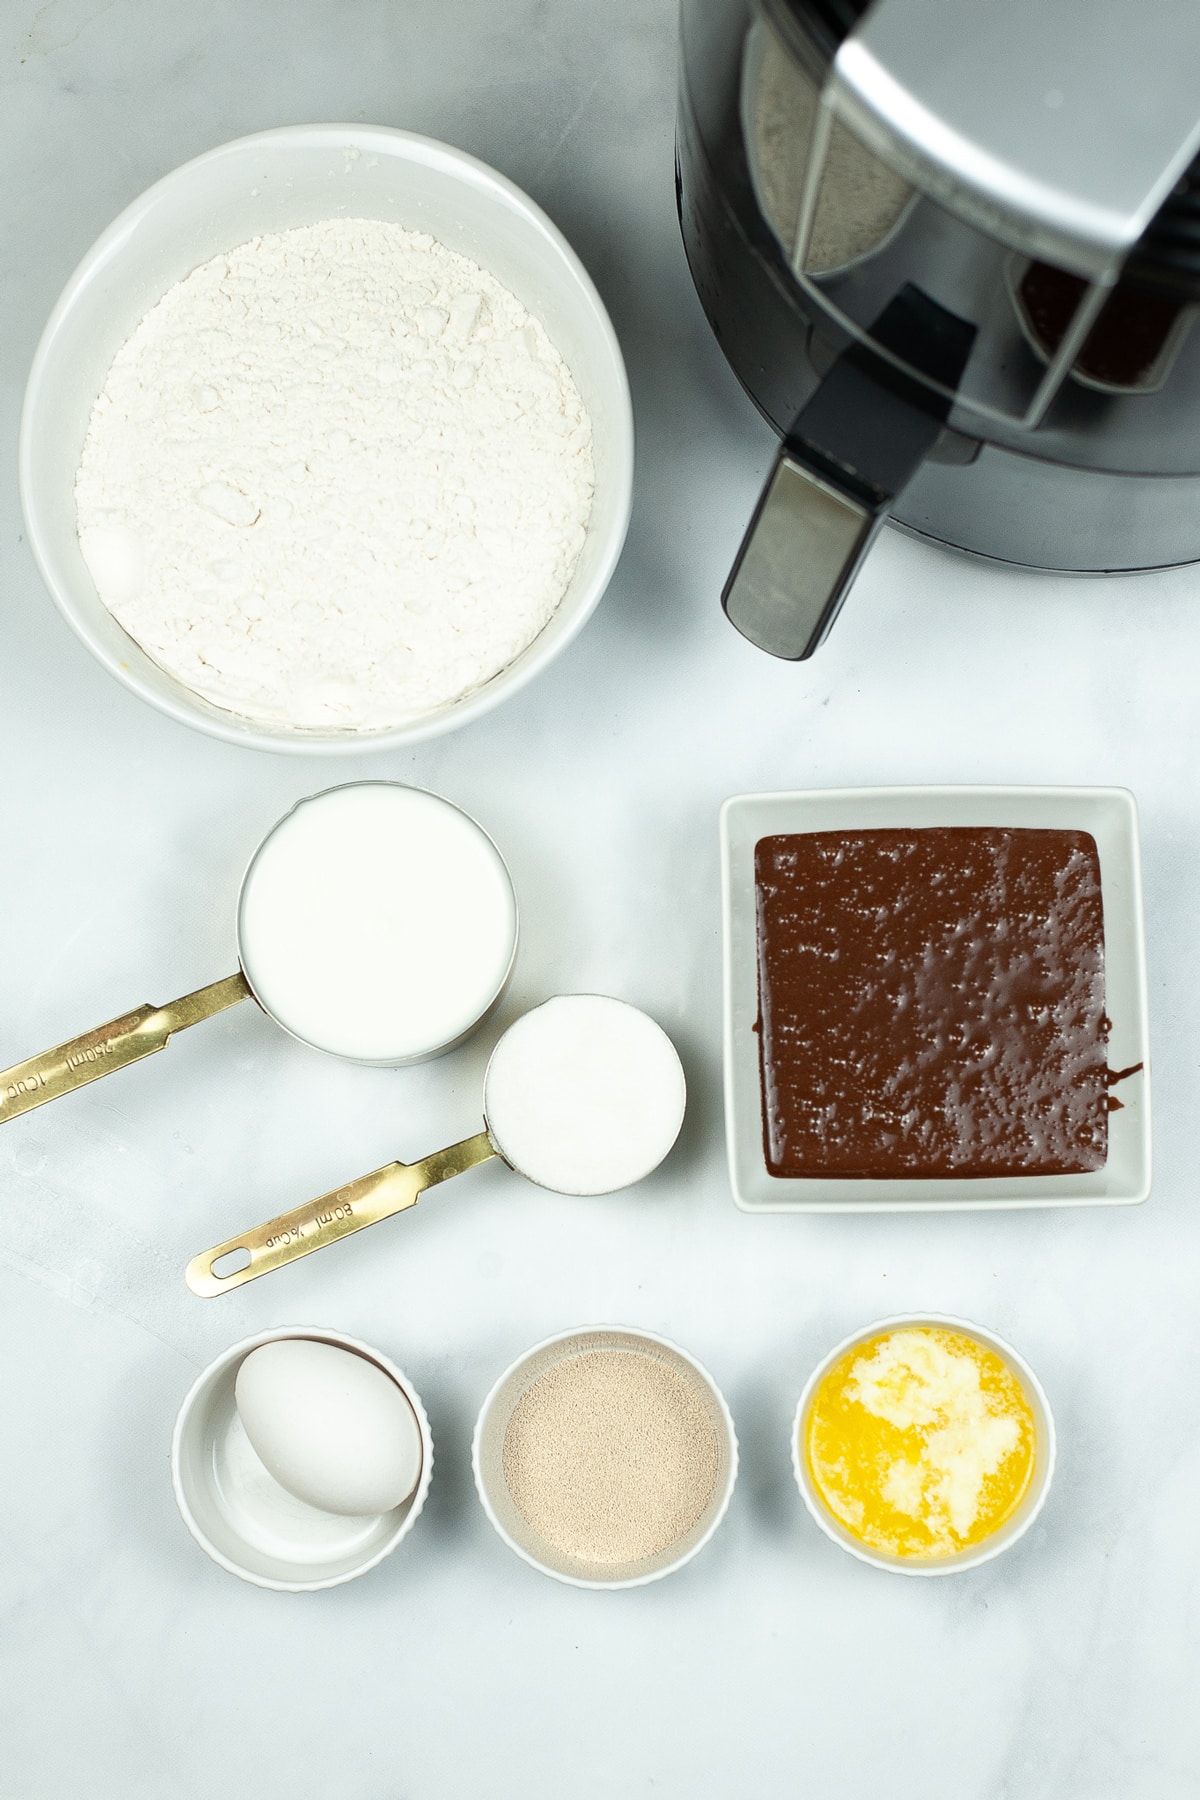 Ingredients for Chocolate Glazed Air Fryer Donuts on a white counter. These include milk, sugar, yeast, flour, melted butter, egg and chocolate frosting.